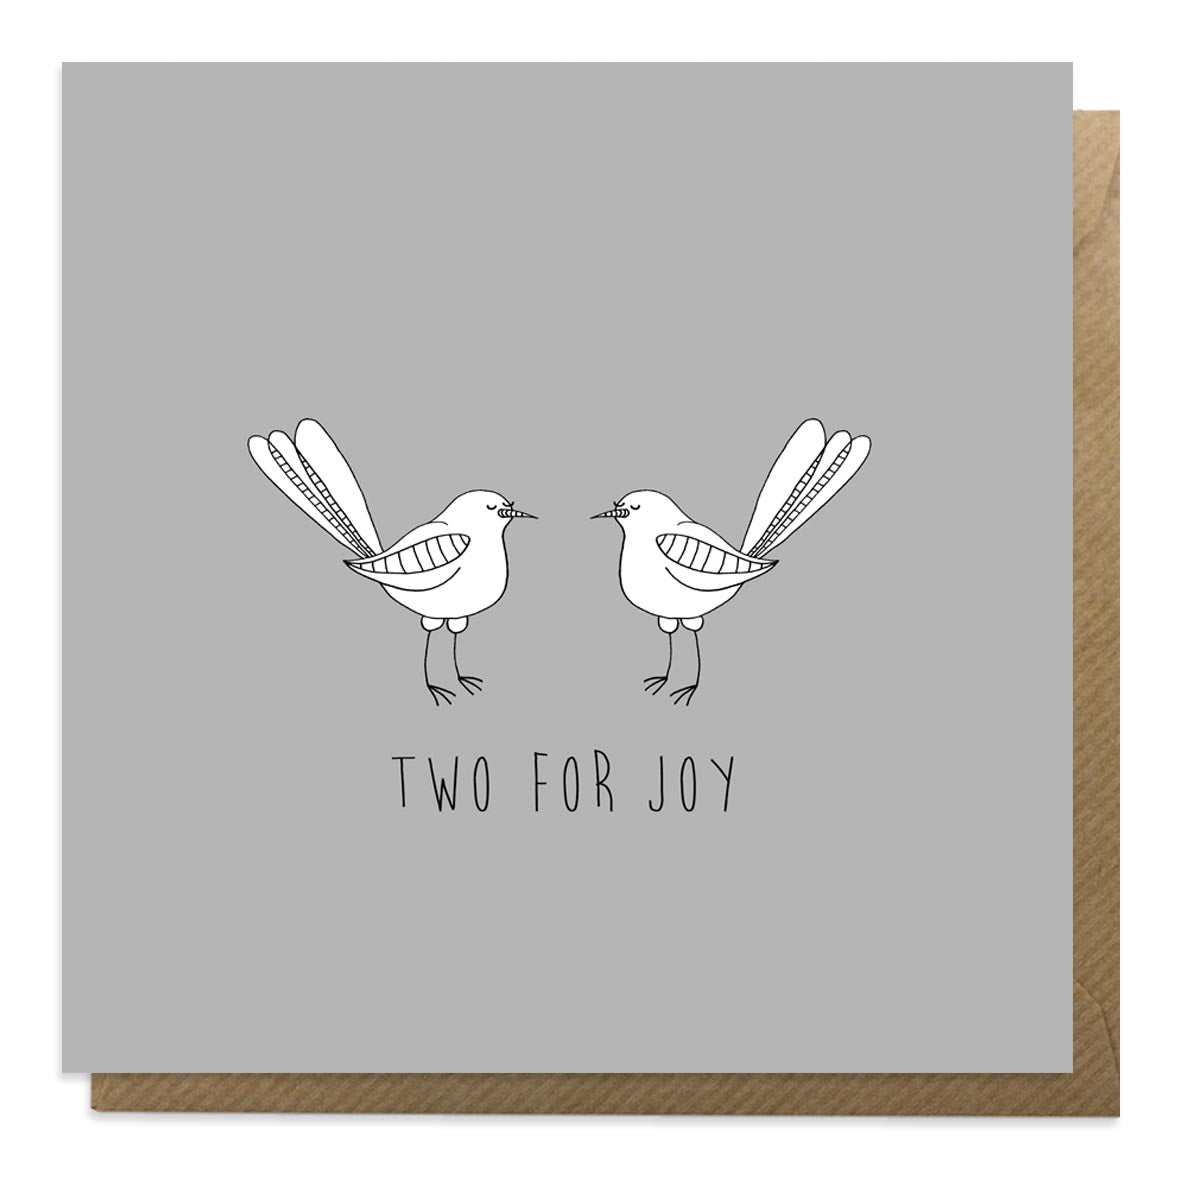 Grey greeting card with an illustration of two magpies